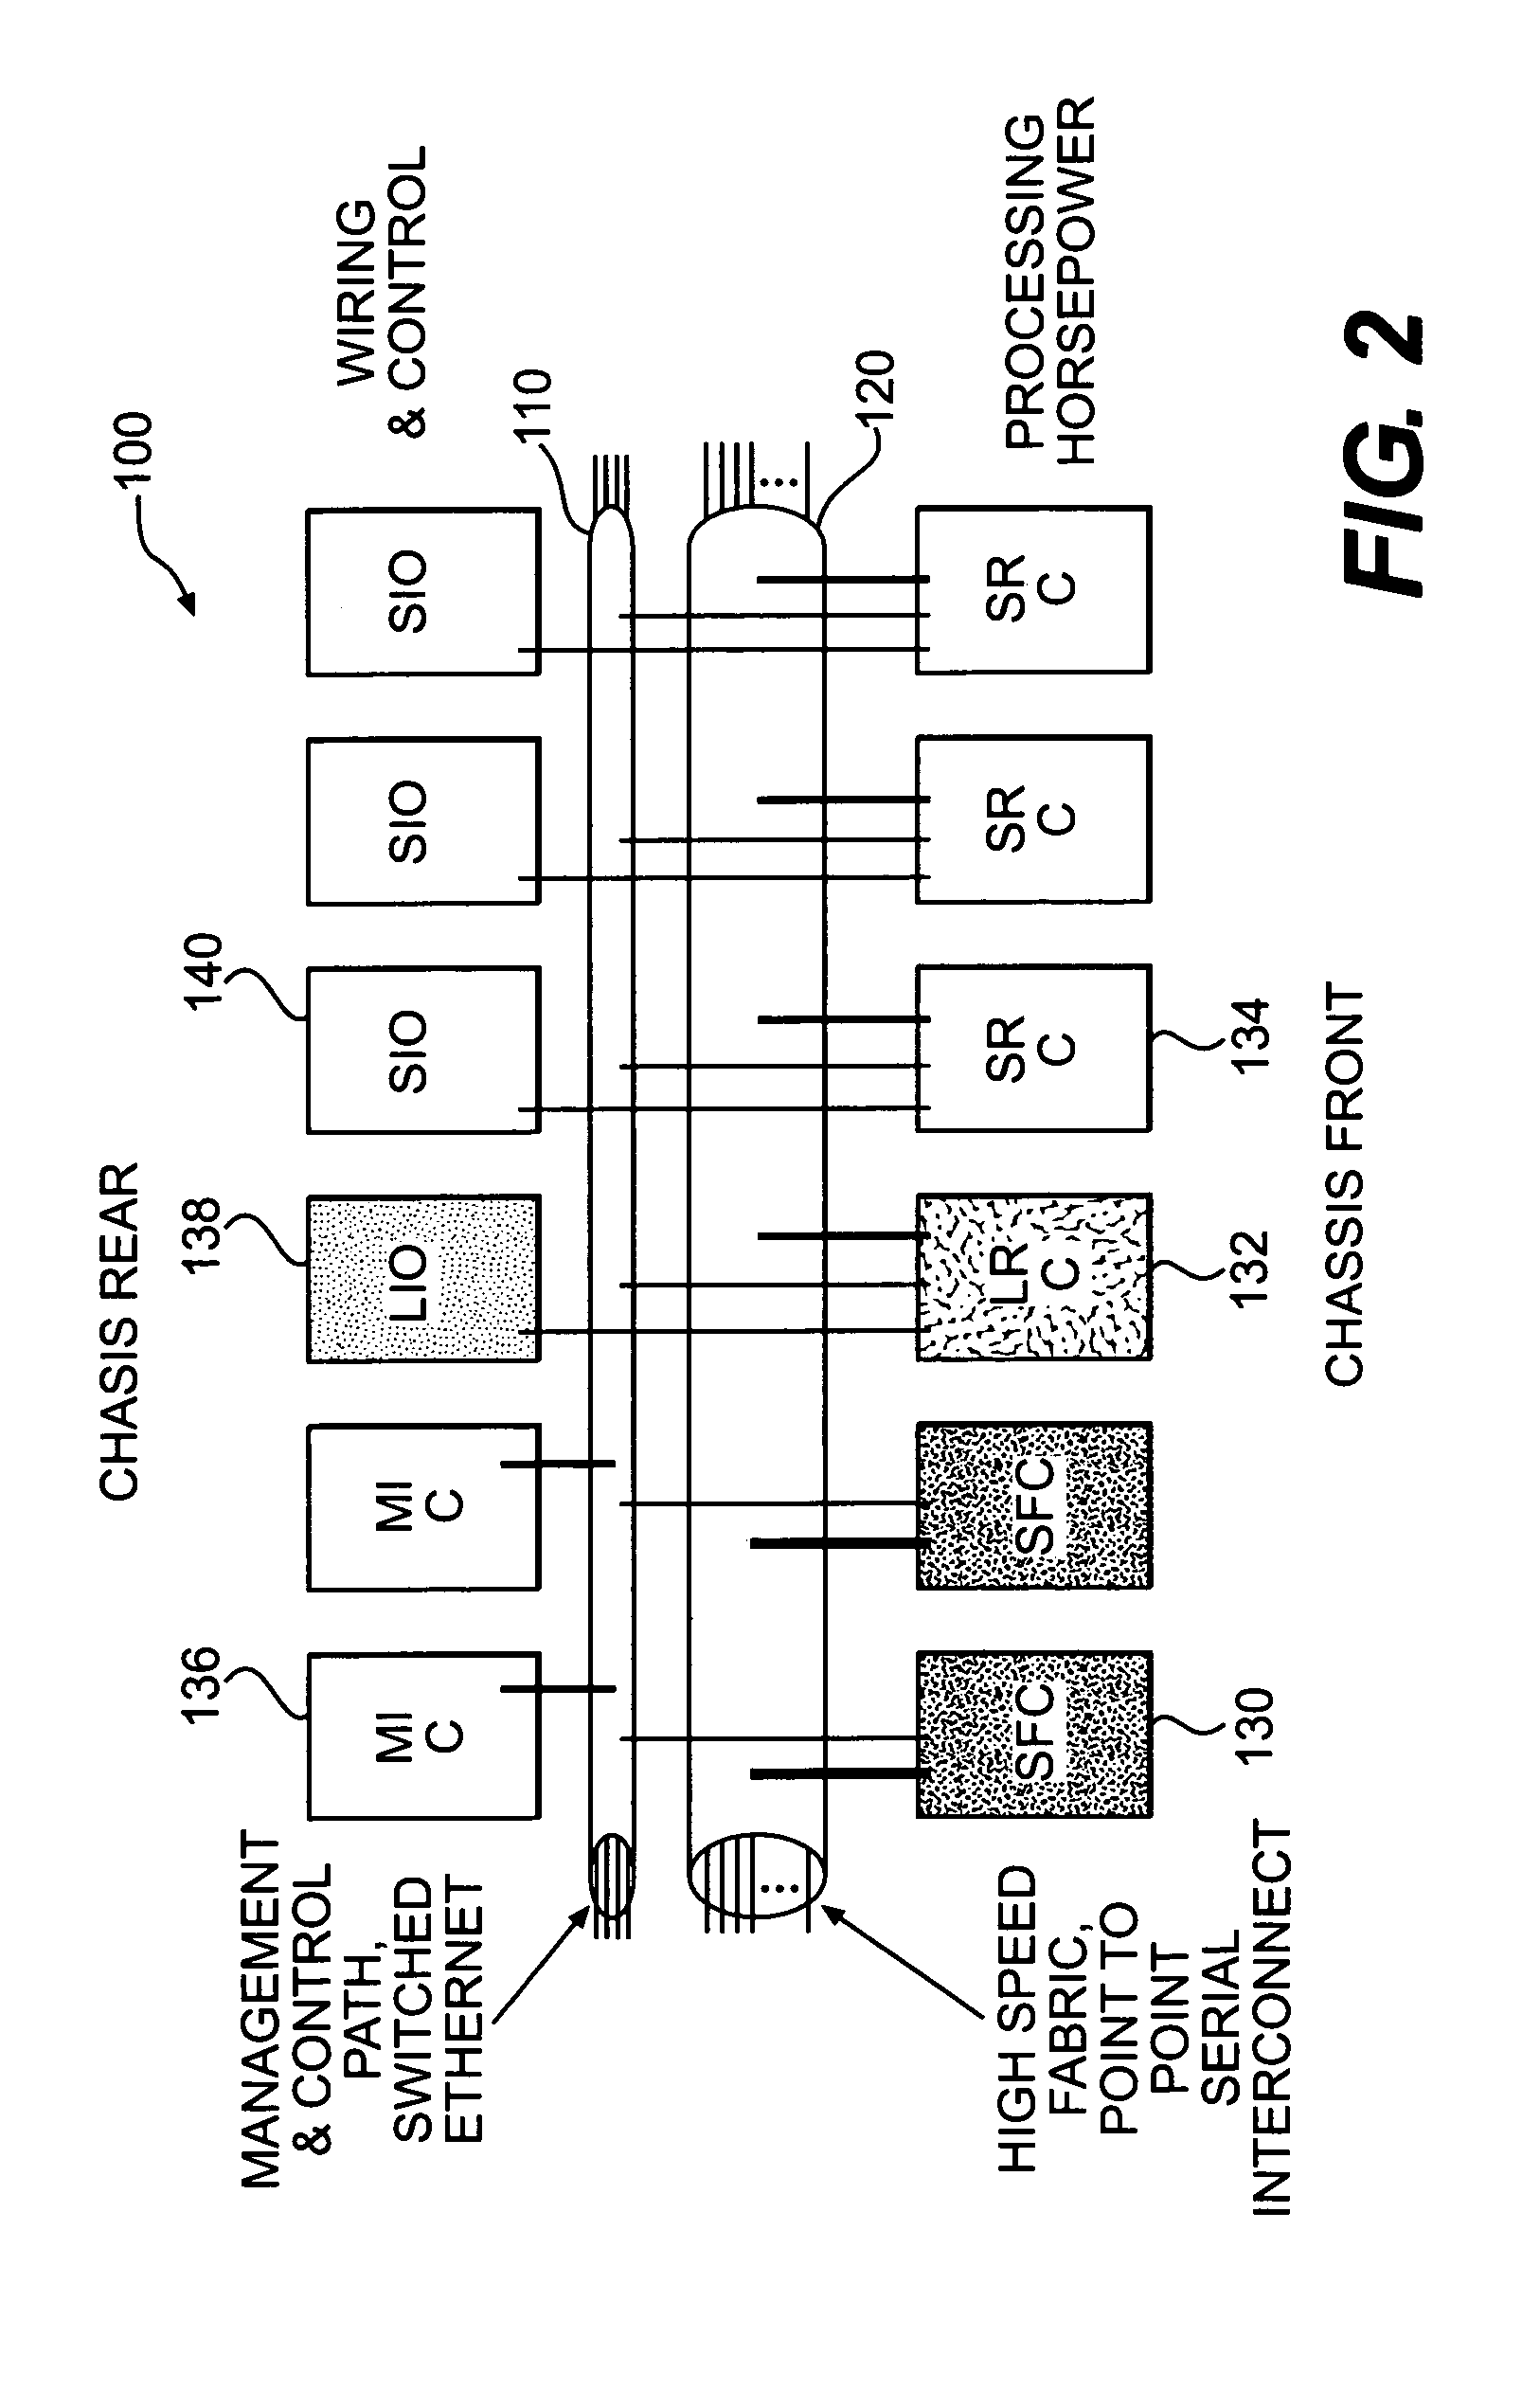 Switching system method for discovering and accessing SCSI devices in response to query